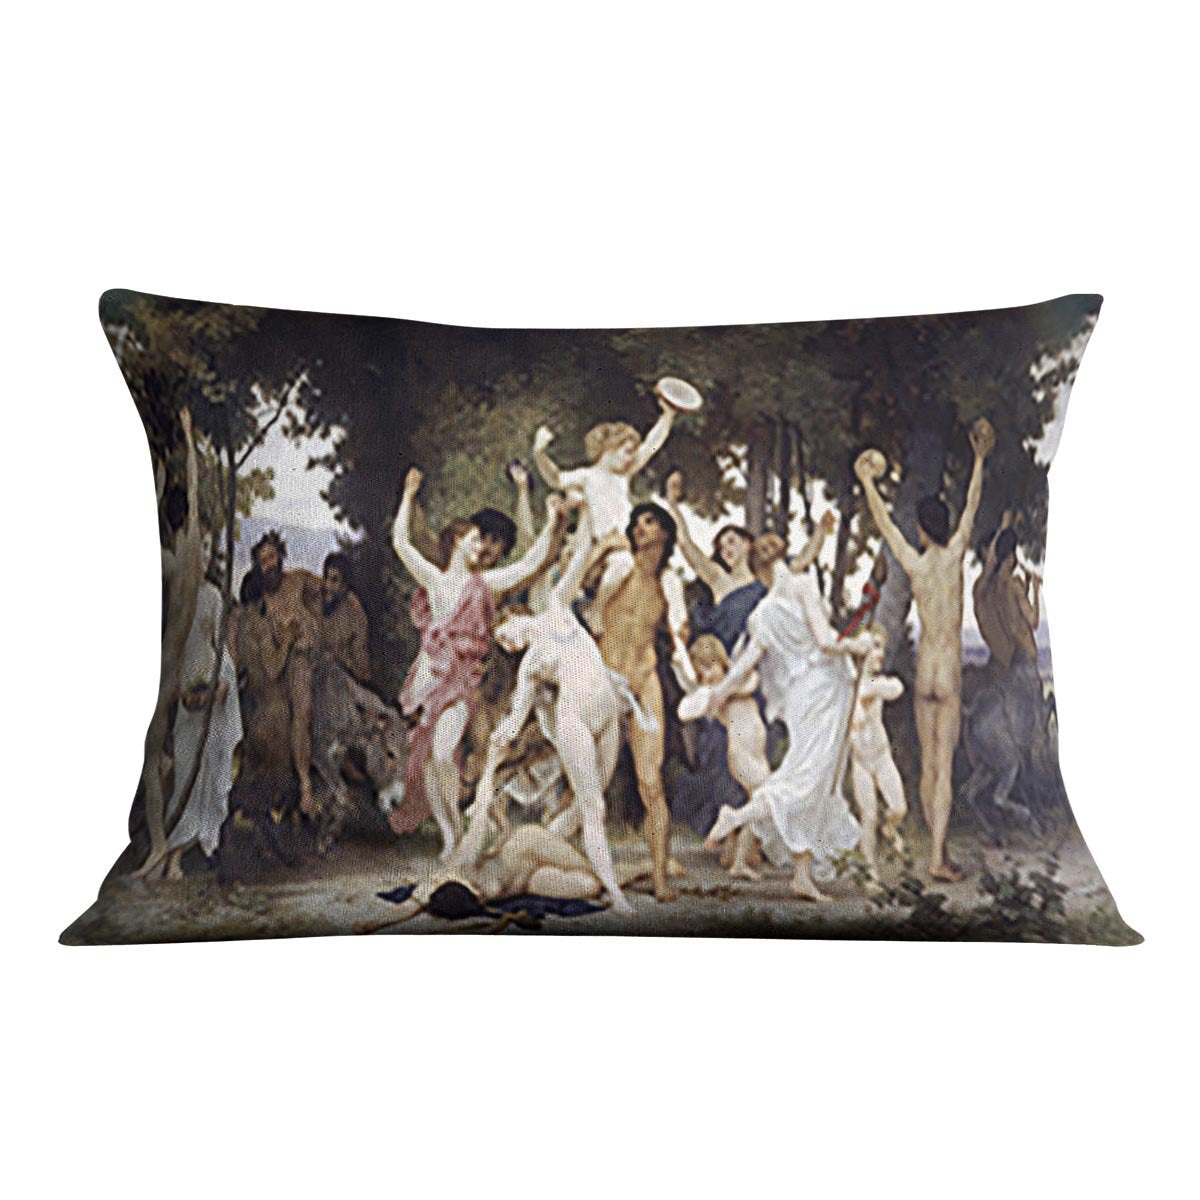 The Youth of Bacchus By Bouguereau Throw Pillow